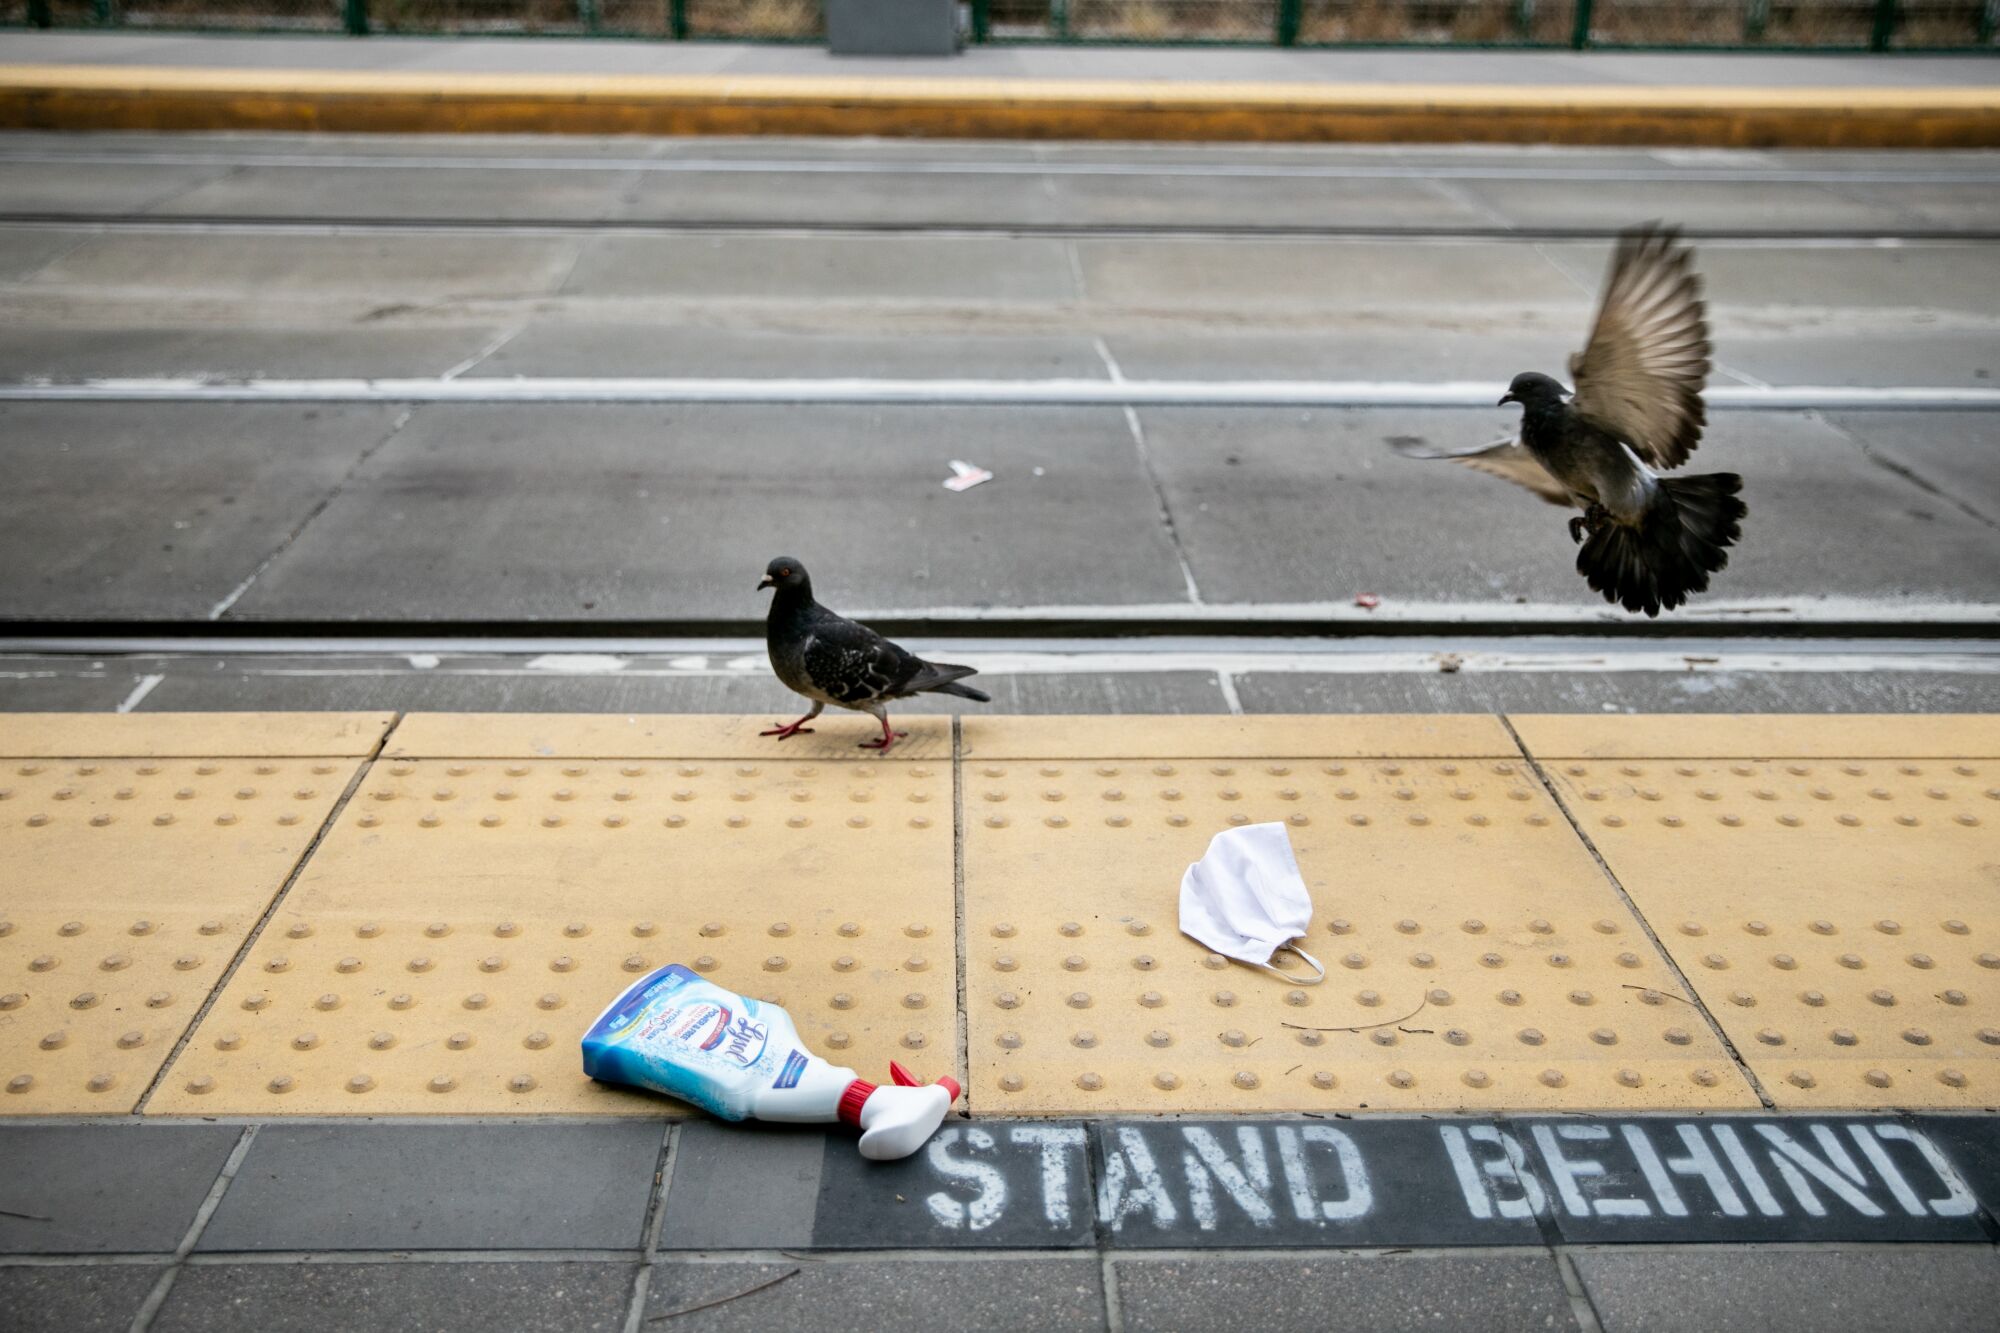 The Seaport Village Trolley Station is largely empty, save for pigeons pecking around a discarded mask and bottle of Lysol